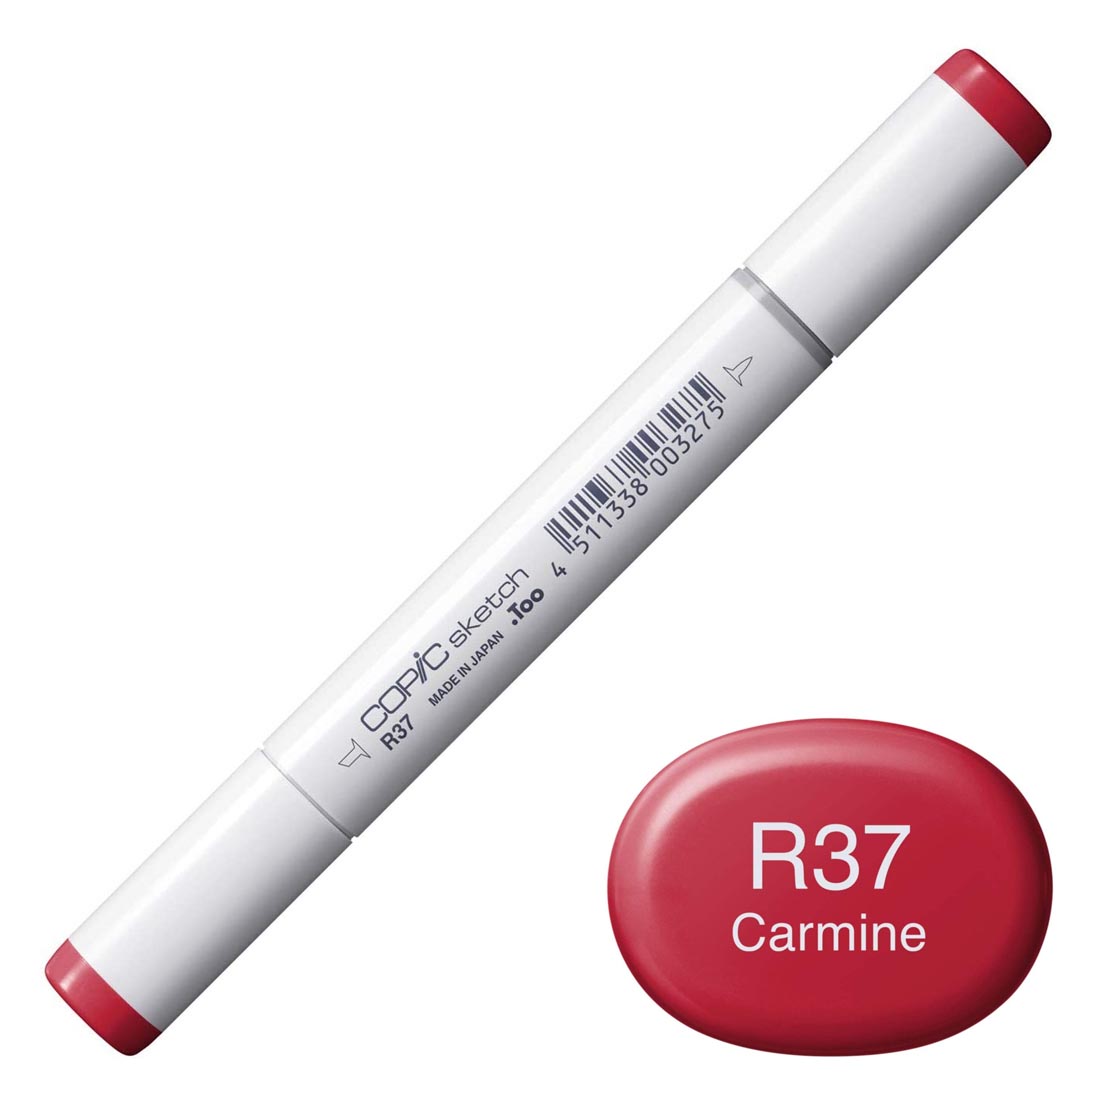 COPIC Sketch Marker with a color swatch and text of R37 Carmine